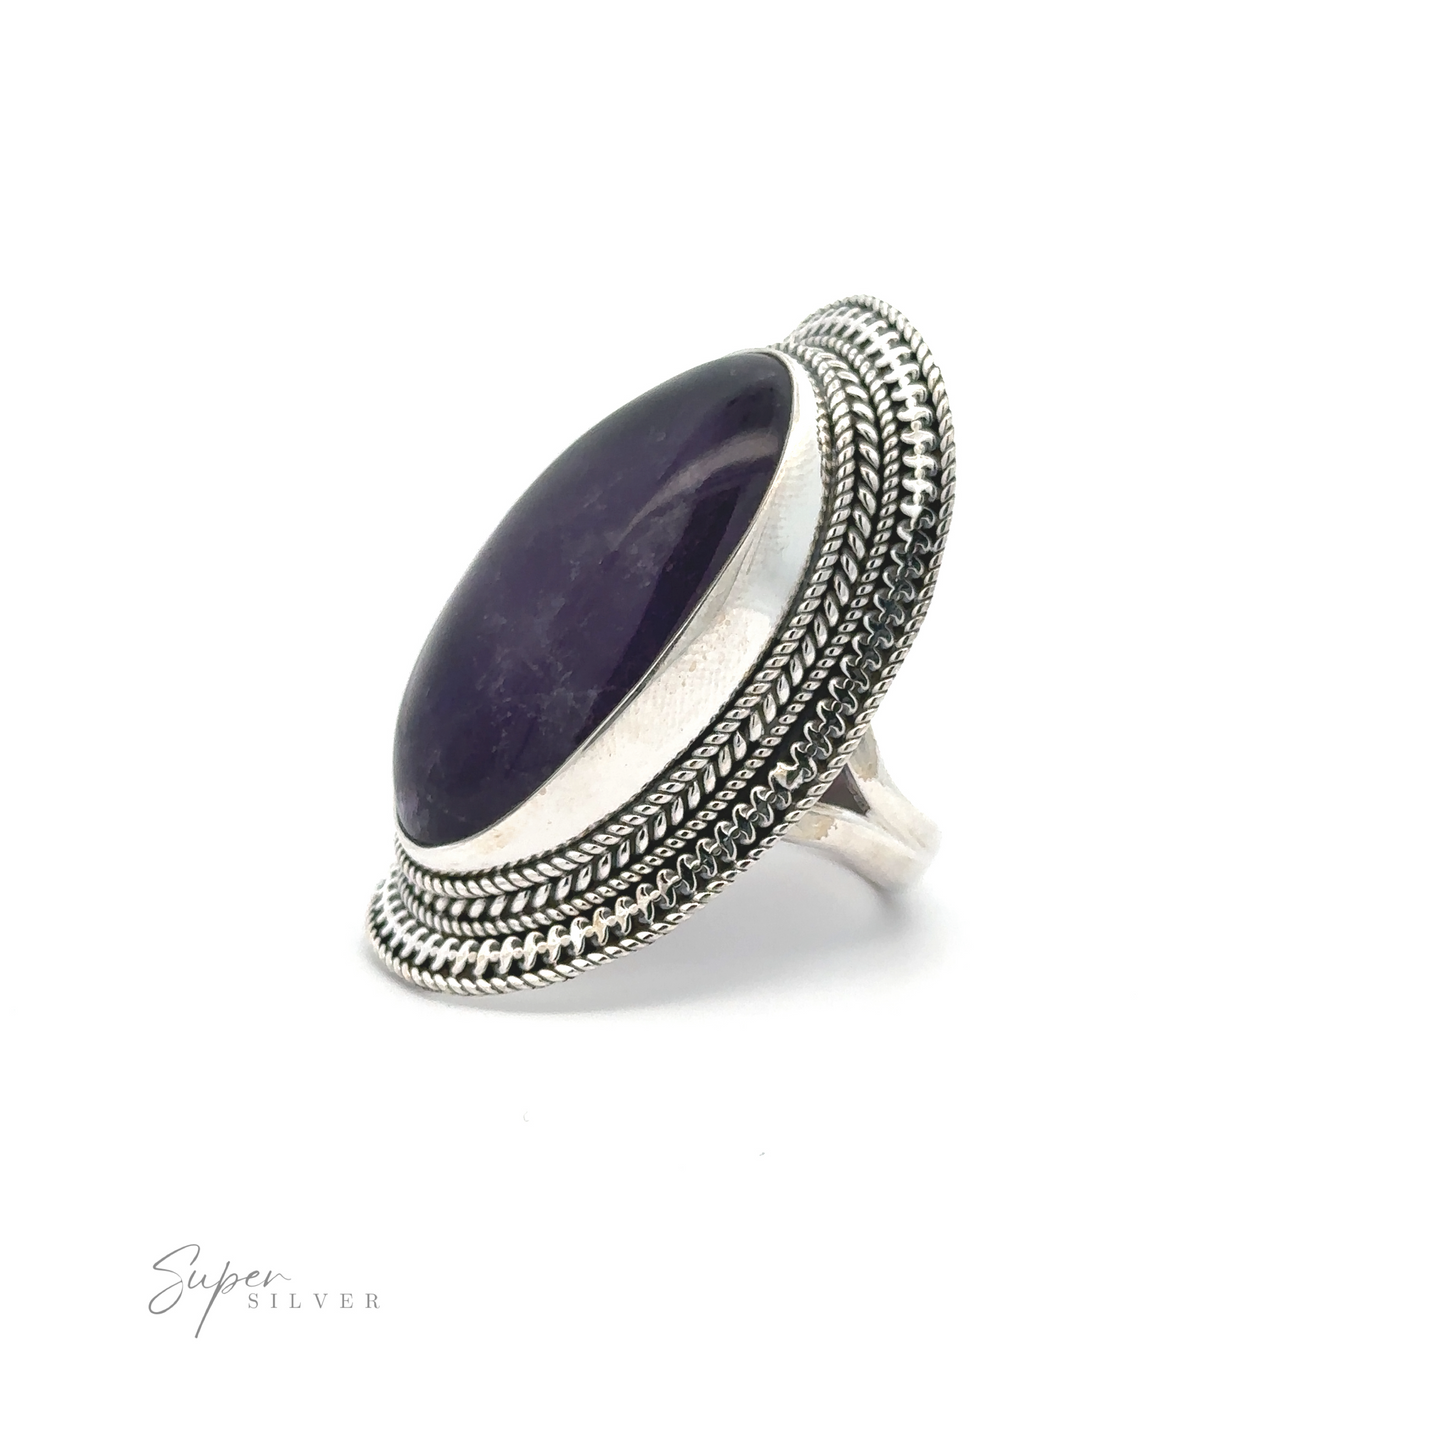 
                  
                    Large Oval Shield Gemstone Ring with a large oval purple gemstone set into an ornate bezel. The detailed metalwork around the stone adds a bohemian flair to this stunning piece. "Super Silver" is written in the bottom left corner.
                  
                